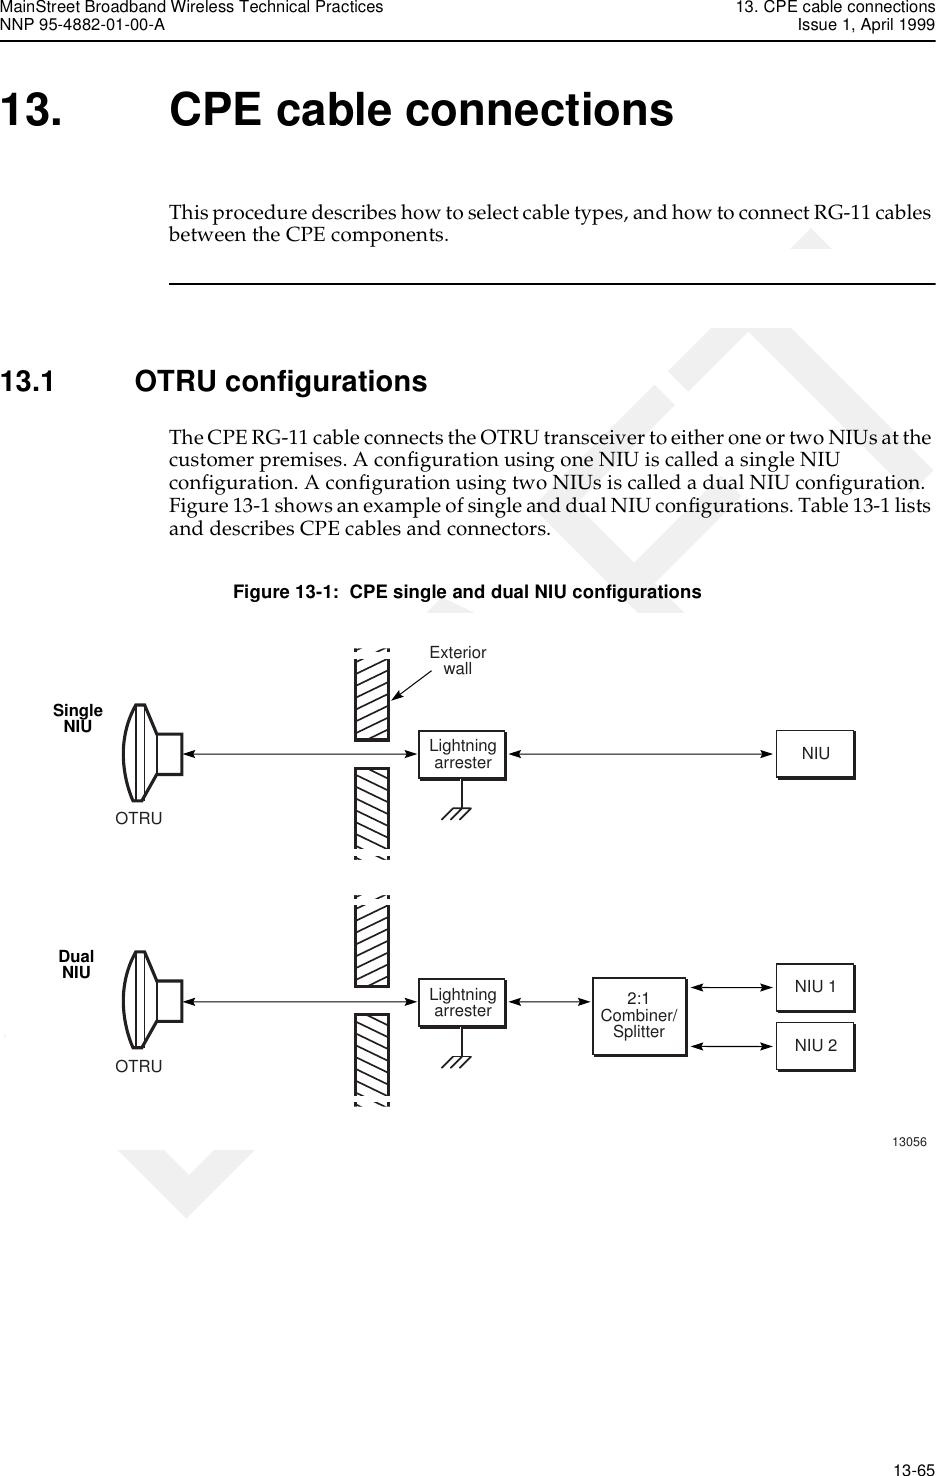 MainStreet Broadband Wireless Technical Practices 13. CPE cable connectionsNNP 95-4882-01-00-A Issue 1, April 1999   13-65DRAFT13. CPE cable connectionsThis procedure describes how to select cable types, and how to connect RG-11 cables between the CPE components.13.1 OTRU configurationsThe CPE RG-11 cable connects the OTRU transceiver to either one or two NIUs at the customer premises. A configuration using one NIU is called a single NIU configuration. A configuration using two NIUs is called a dual NIU configuration. Figure 13-1 shows an example of single and dual NIU configurations. Table 13-1 lists and describes CPE cables and connectors.Figure 13-1:  CPE single and dual NIU configurationsOTRUExteriorwallNIU 1NIUNIU 2LightningarresterOTRU2:1Combiner/SplitterSingleNIUDualNIU13056Lightningarrester